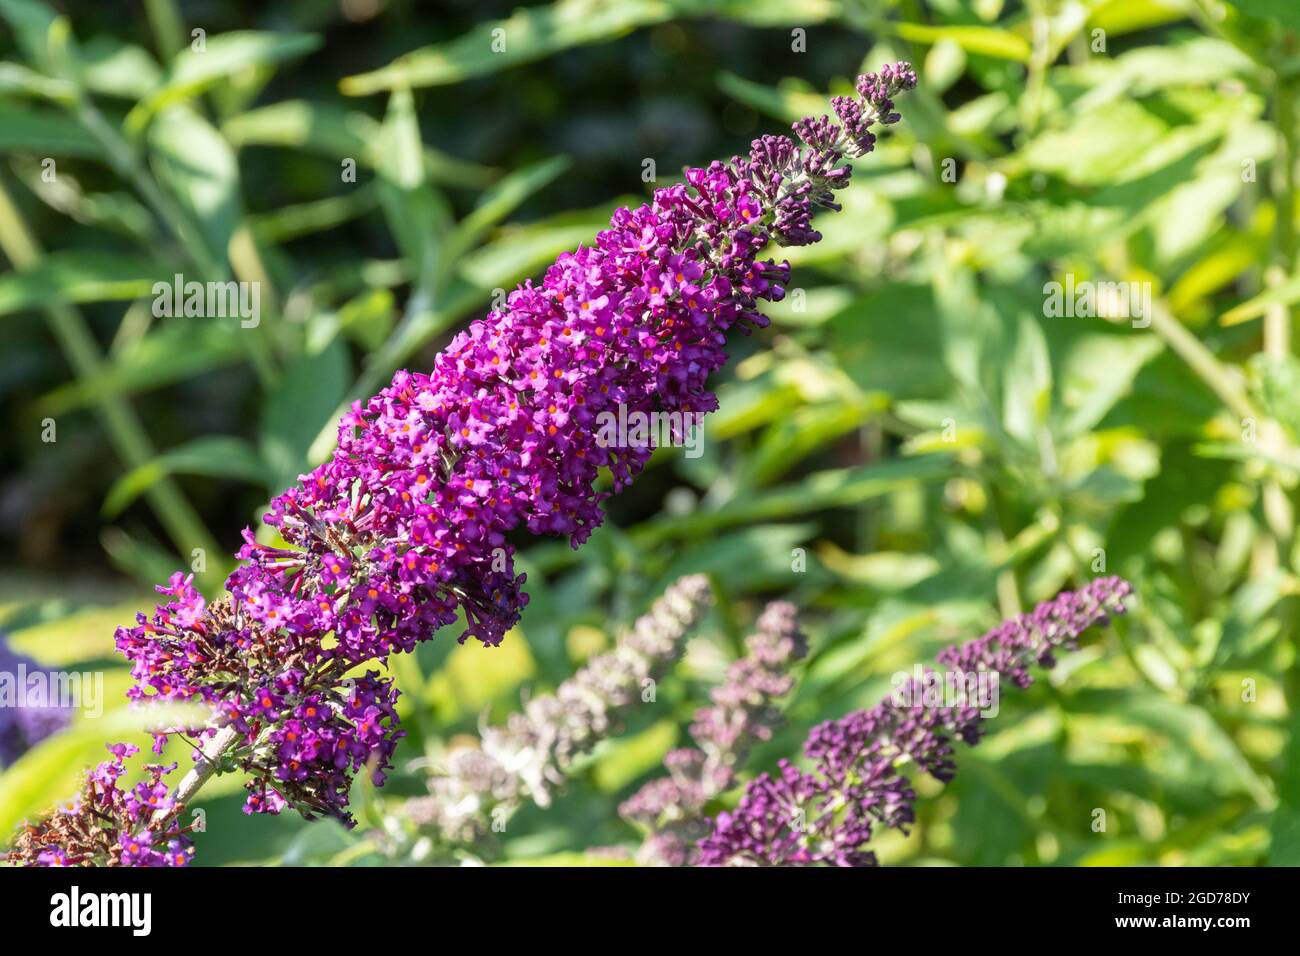 Buddleia davidii Fascination (buddleja variety), known as a butterfly bush, in flower during august or summer, UK Stock Photo